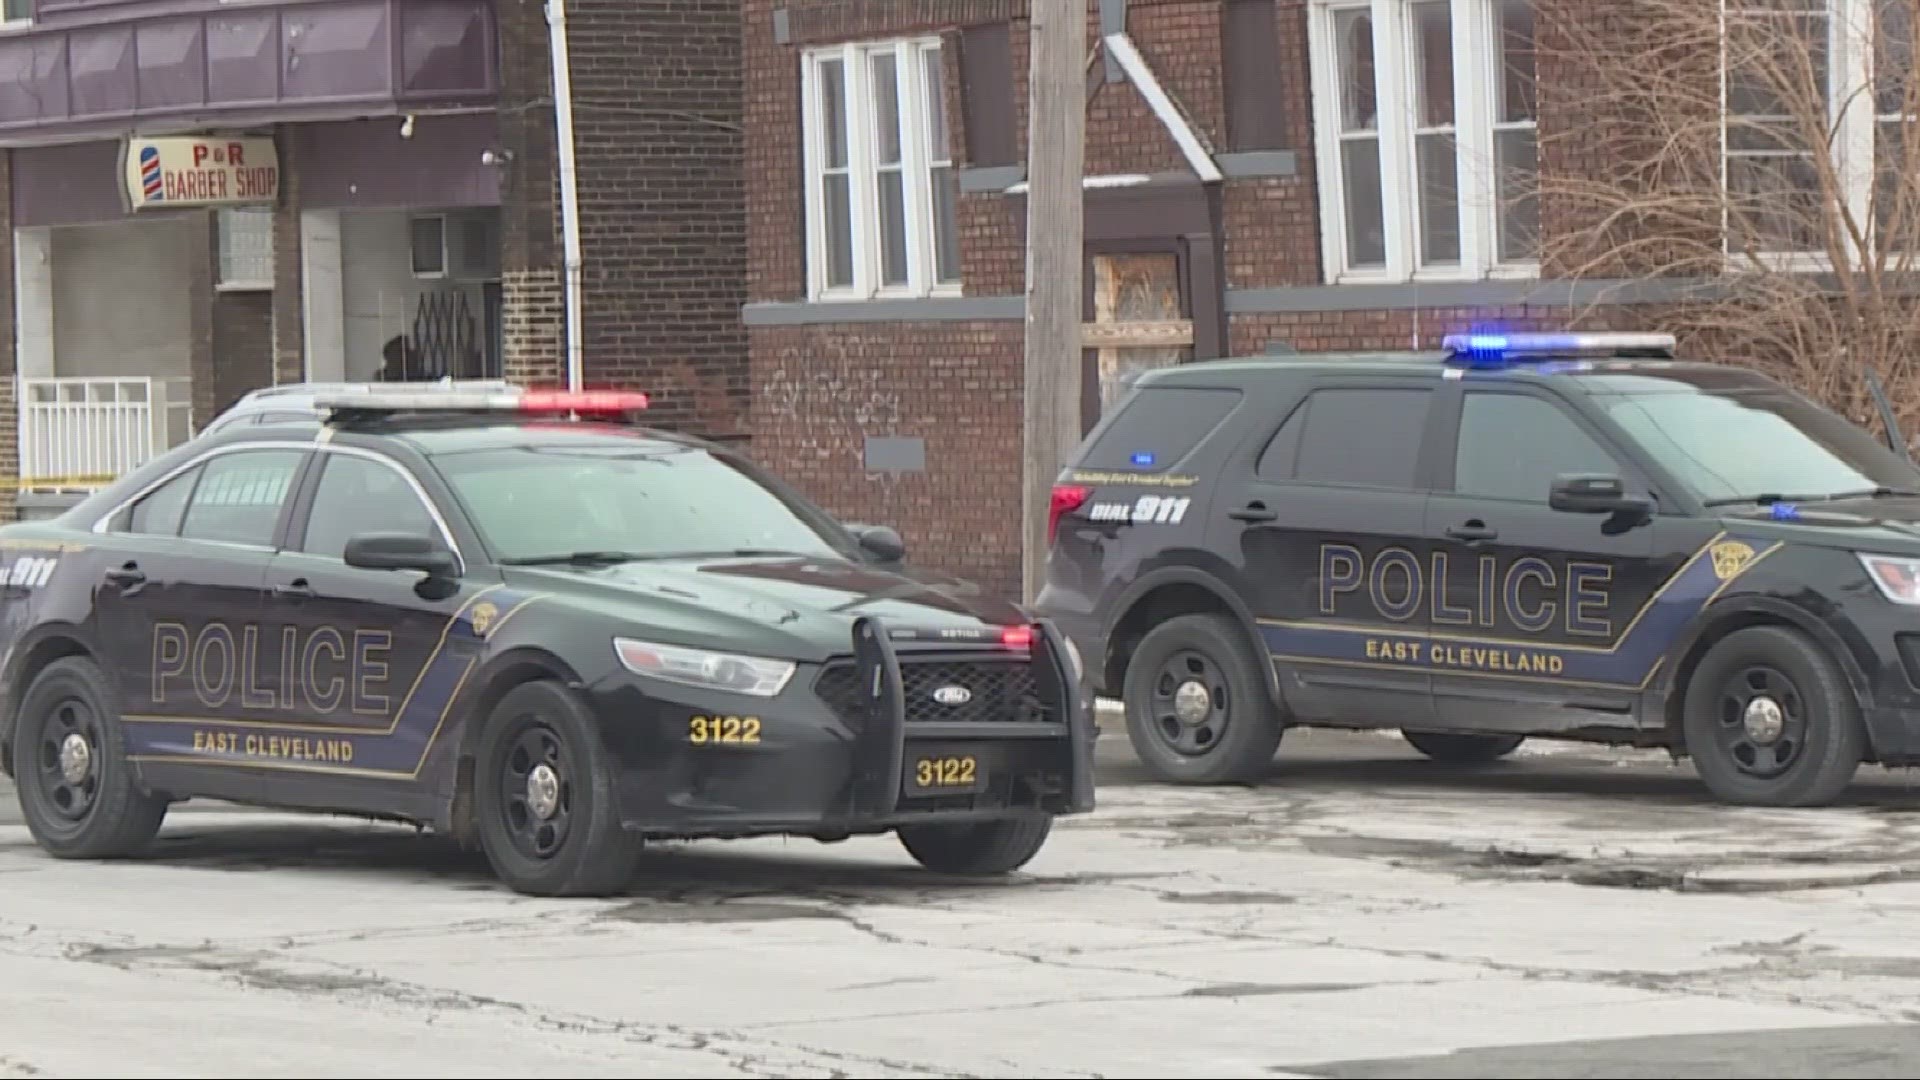 A total of 17 current or former East Cleveland police officers have been indicted on criminal charges over the last nine months.